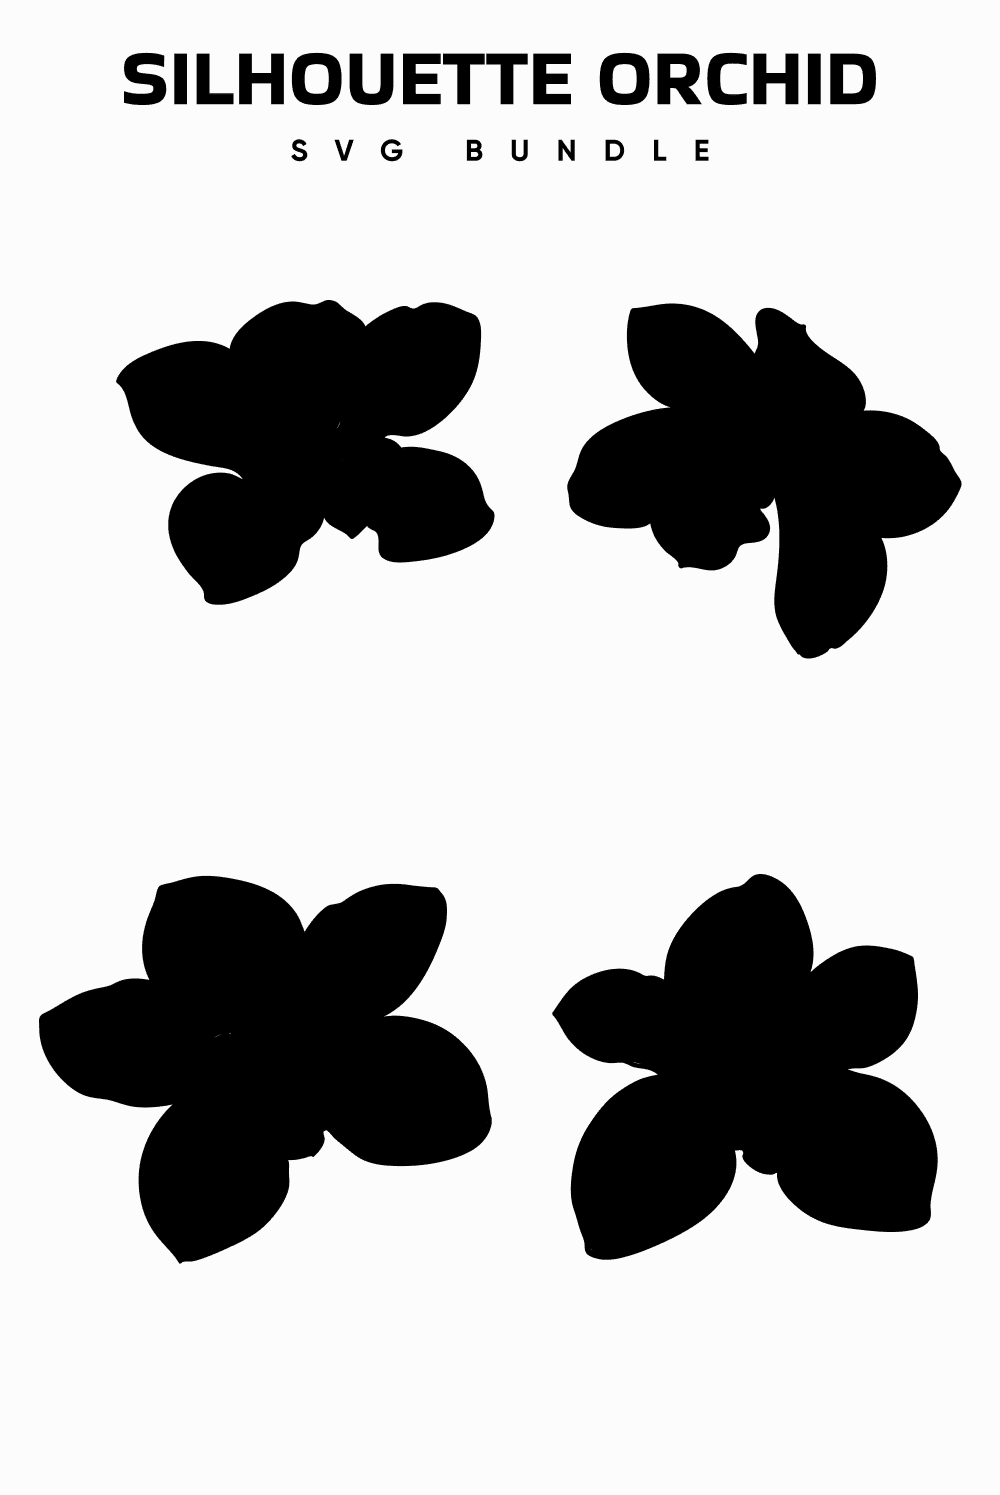 Silhouettes of orchids are depicted on a white background.